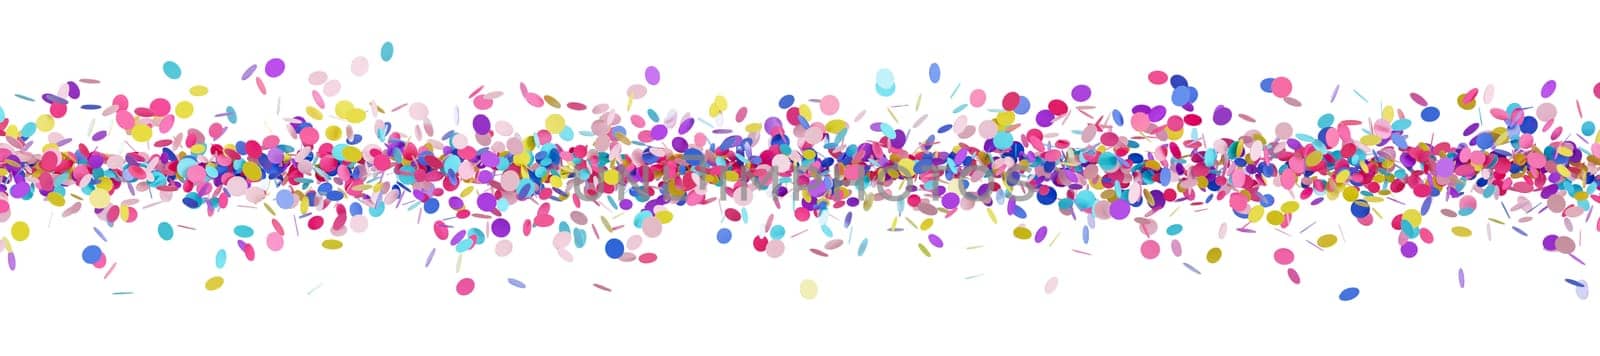 Colorful confetti line isolated on white background. Multicolor, vibrant foreground. Border. Particles row. Cut out graphic design elements. Happy birthday, party decoration. 3D render